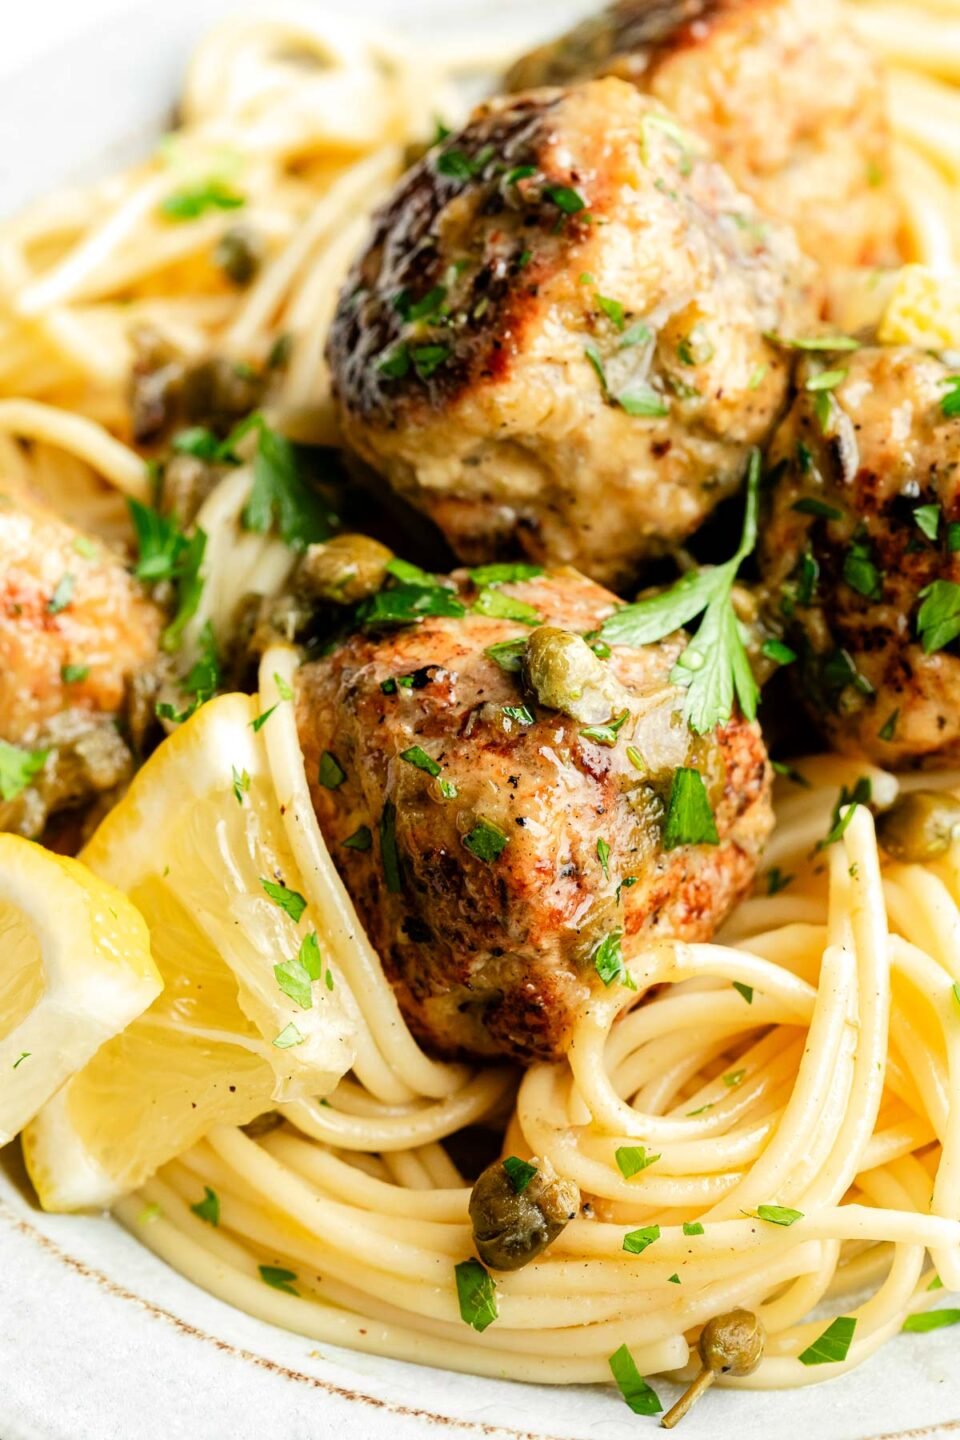 A close-up macro shot of chicken piccata meatballs on a bed of spaghetti, garnished with lemon slices and chopped parsley.